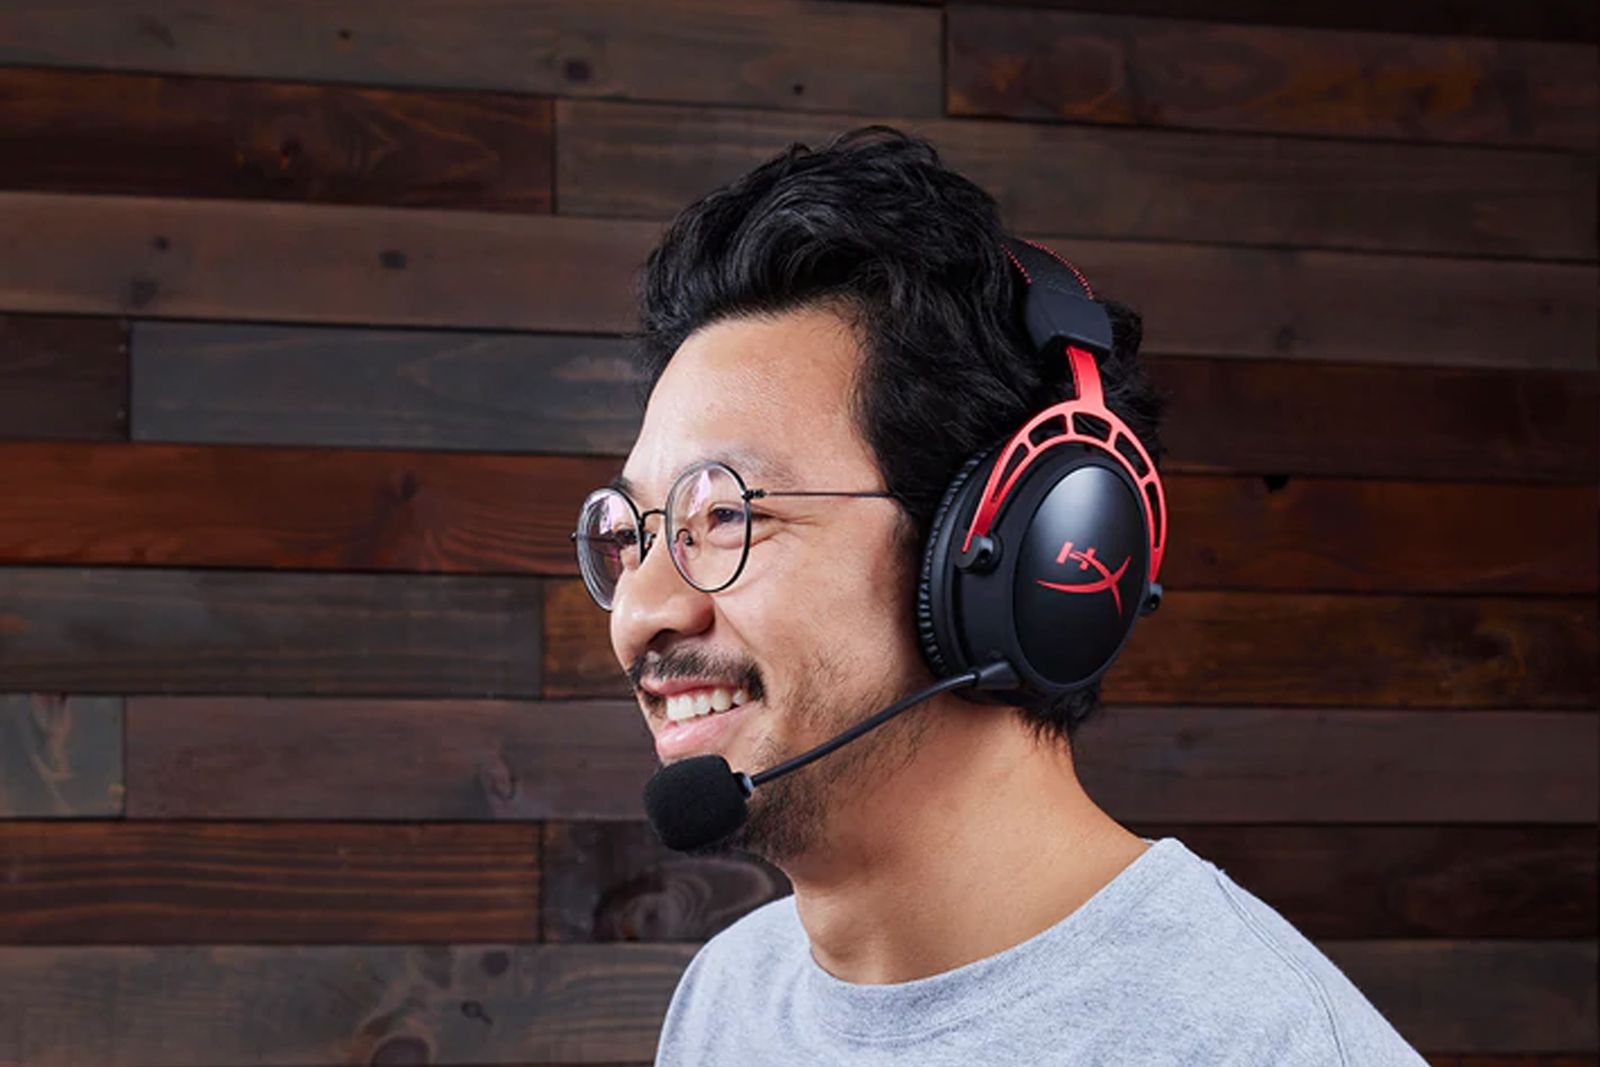 HyperX has a gaming headset for every budget - check them out here photo 1